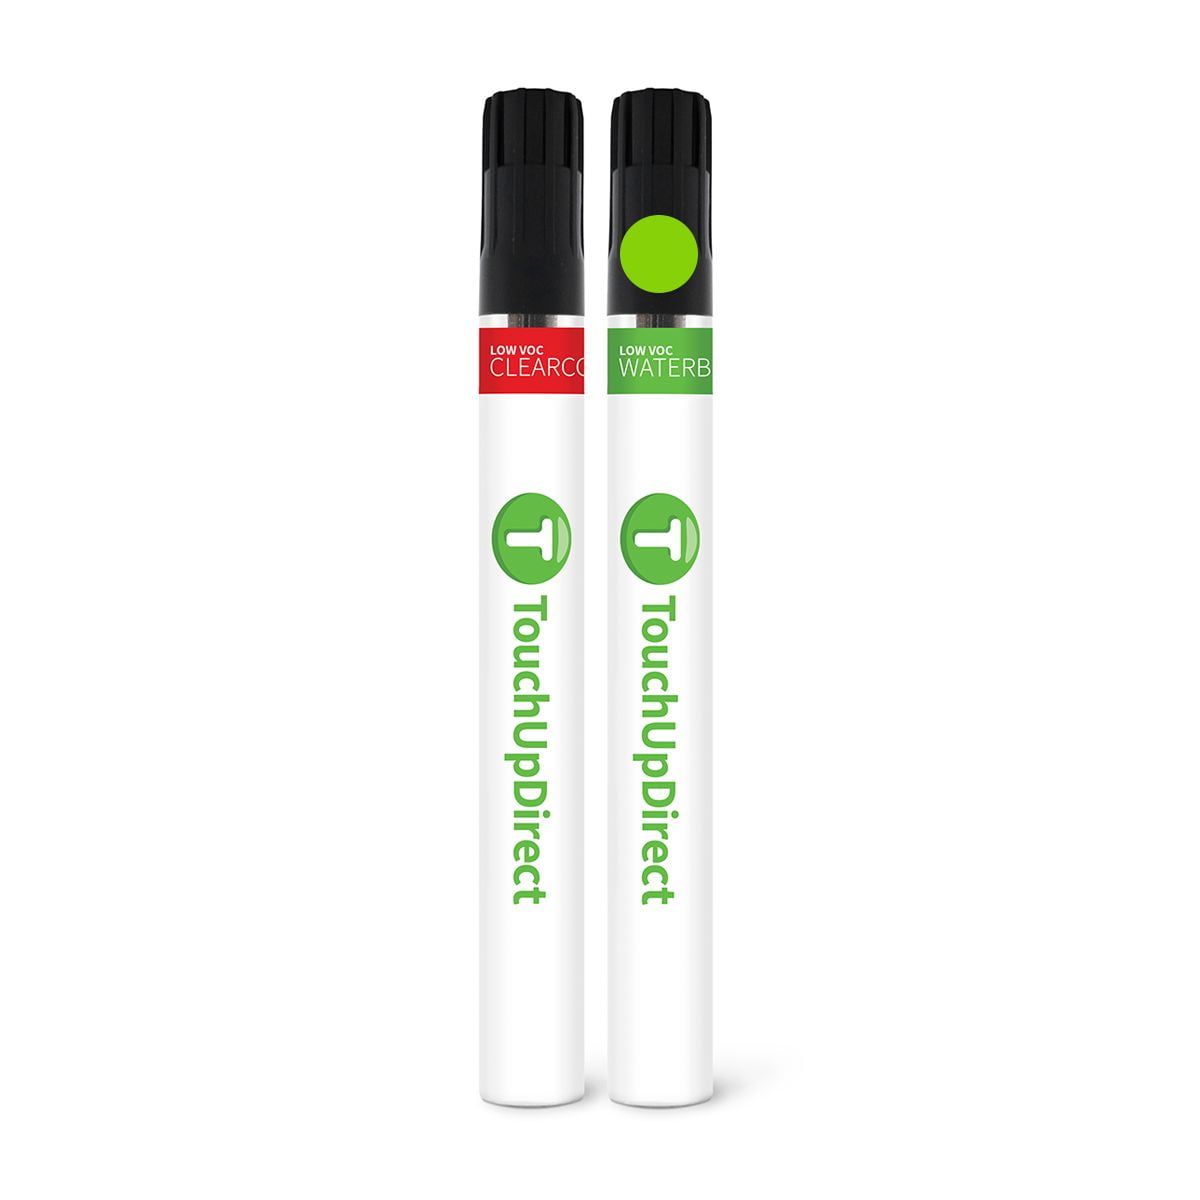 TouchUpDirect KAW006 Candy Lime Green for Kawasaki Exact Match Touch Up  Paint Brush - Essential Package